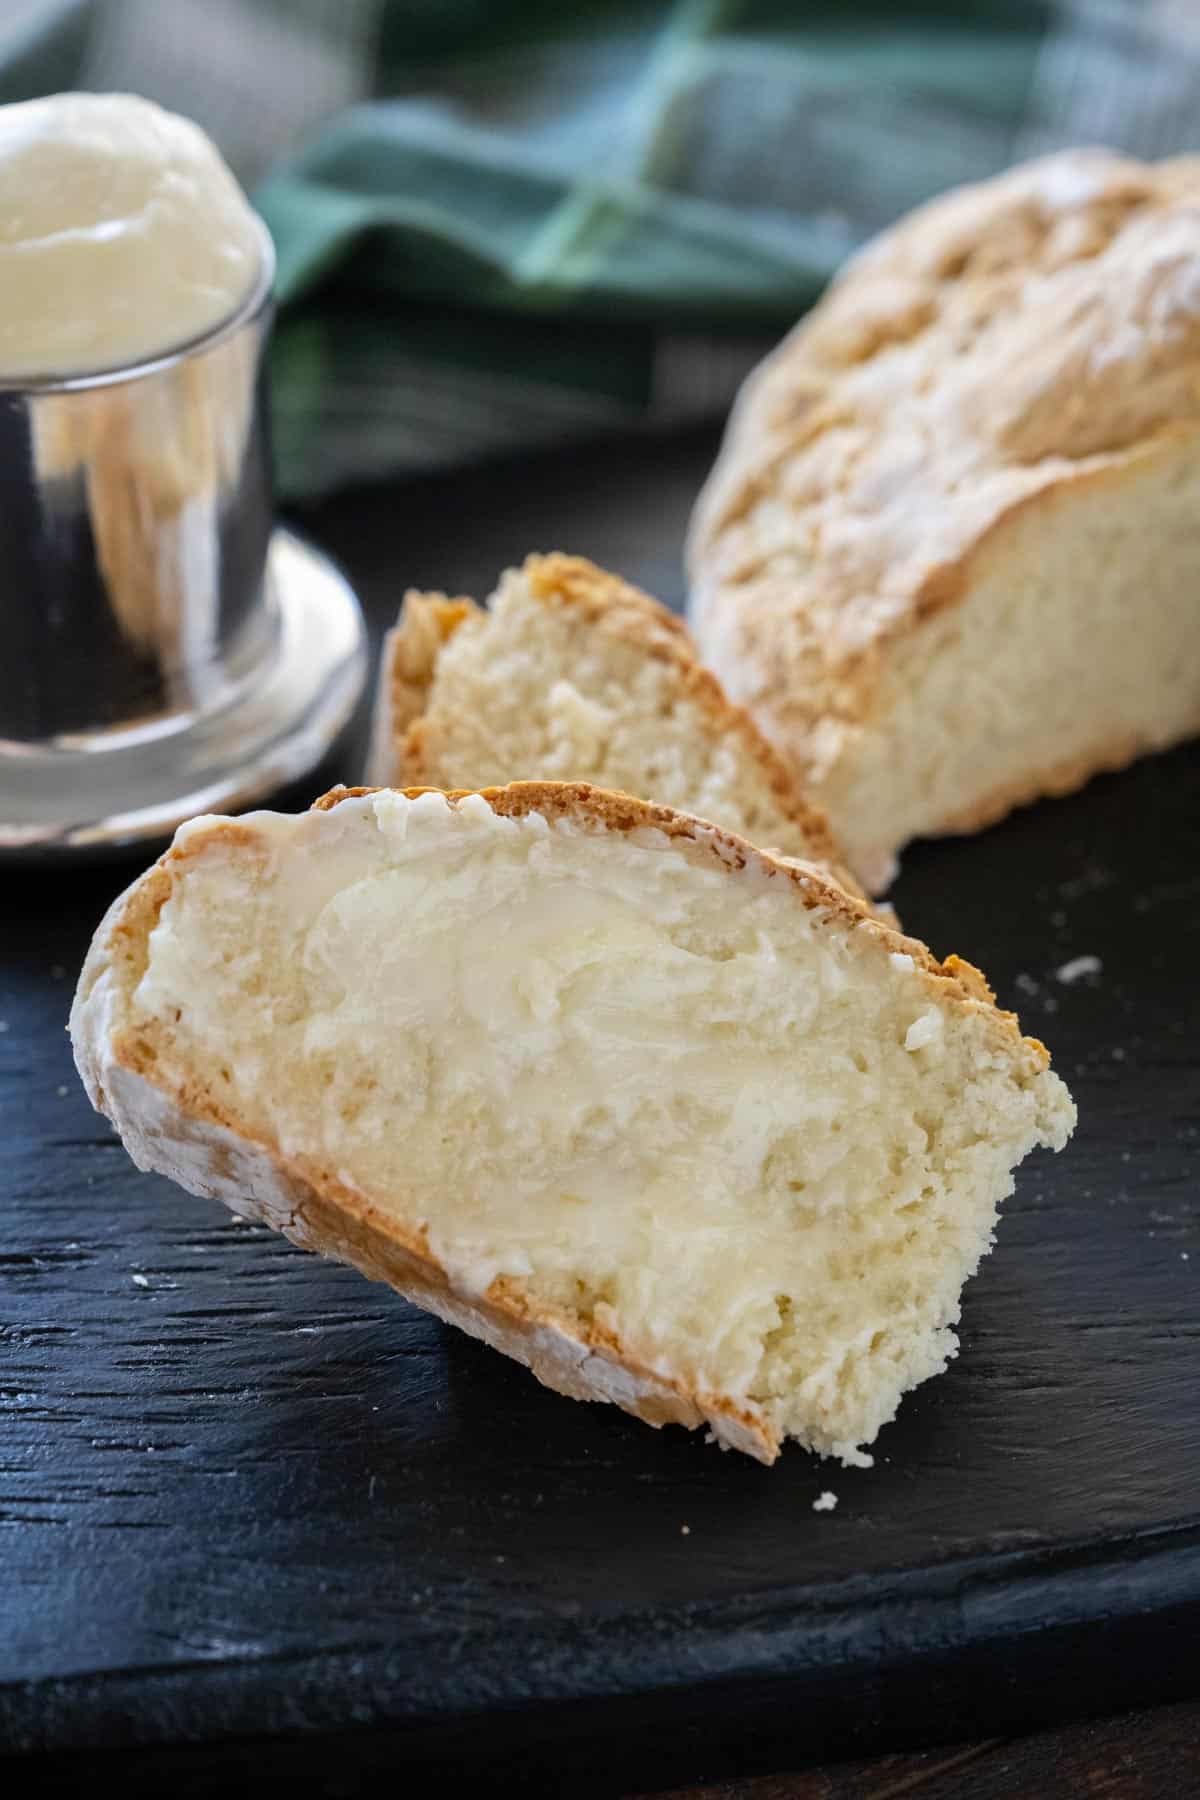 An upclose image of a slice of soda bread slathered in butter.